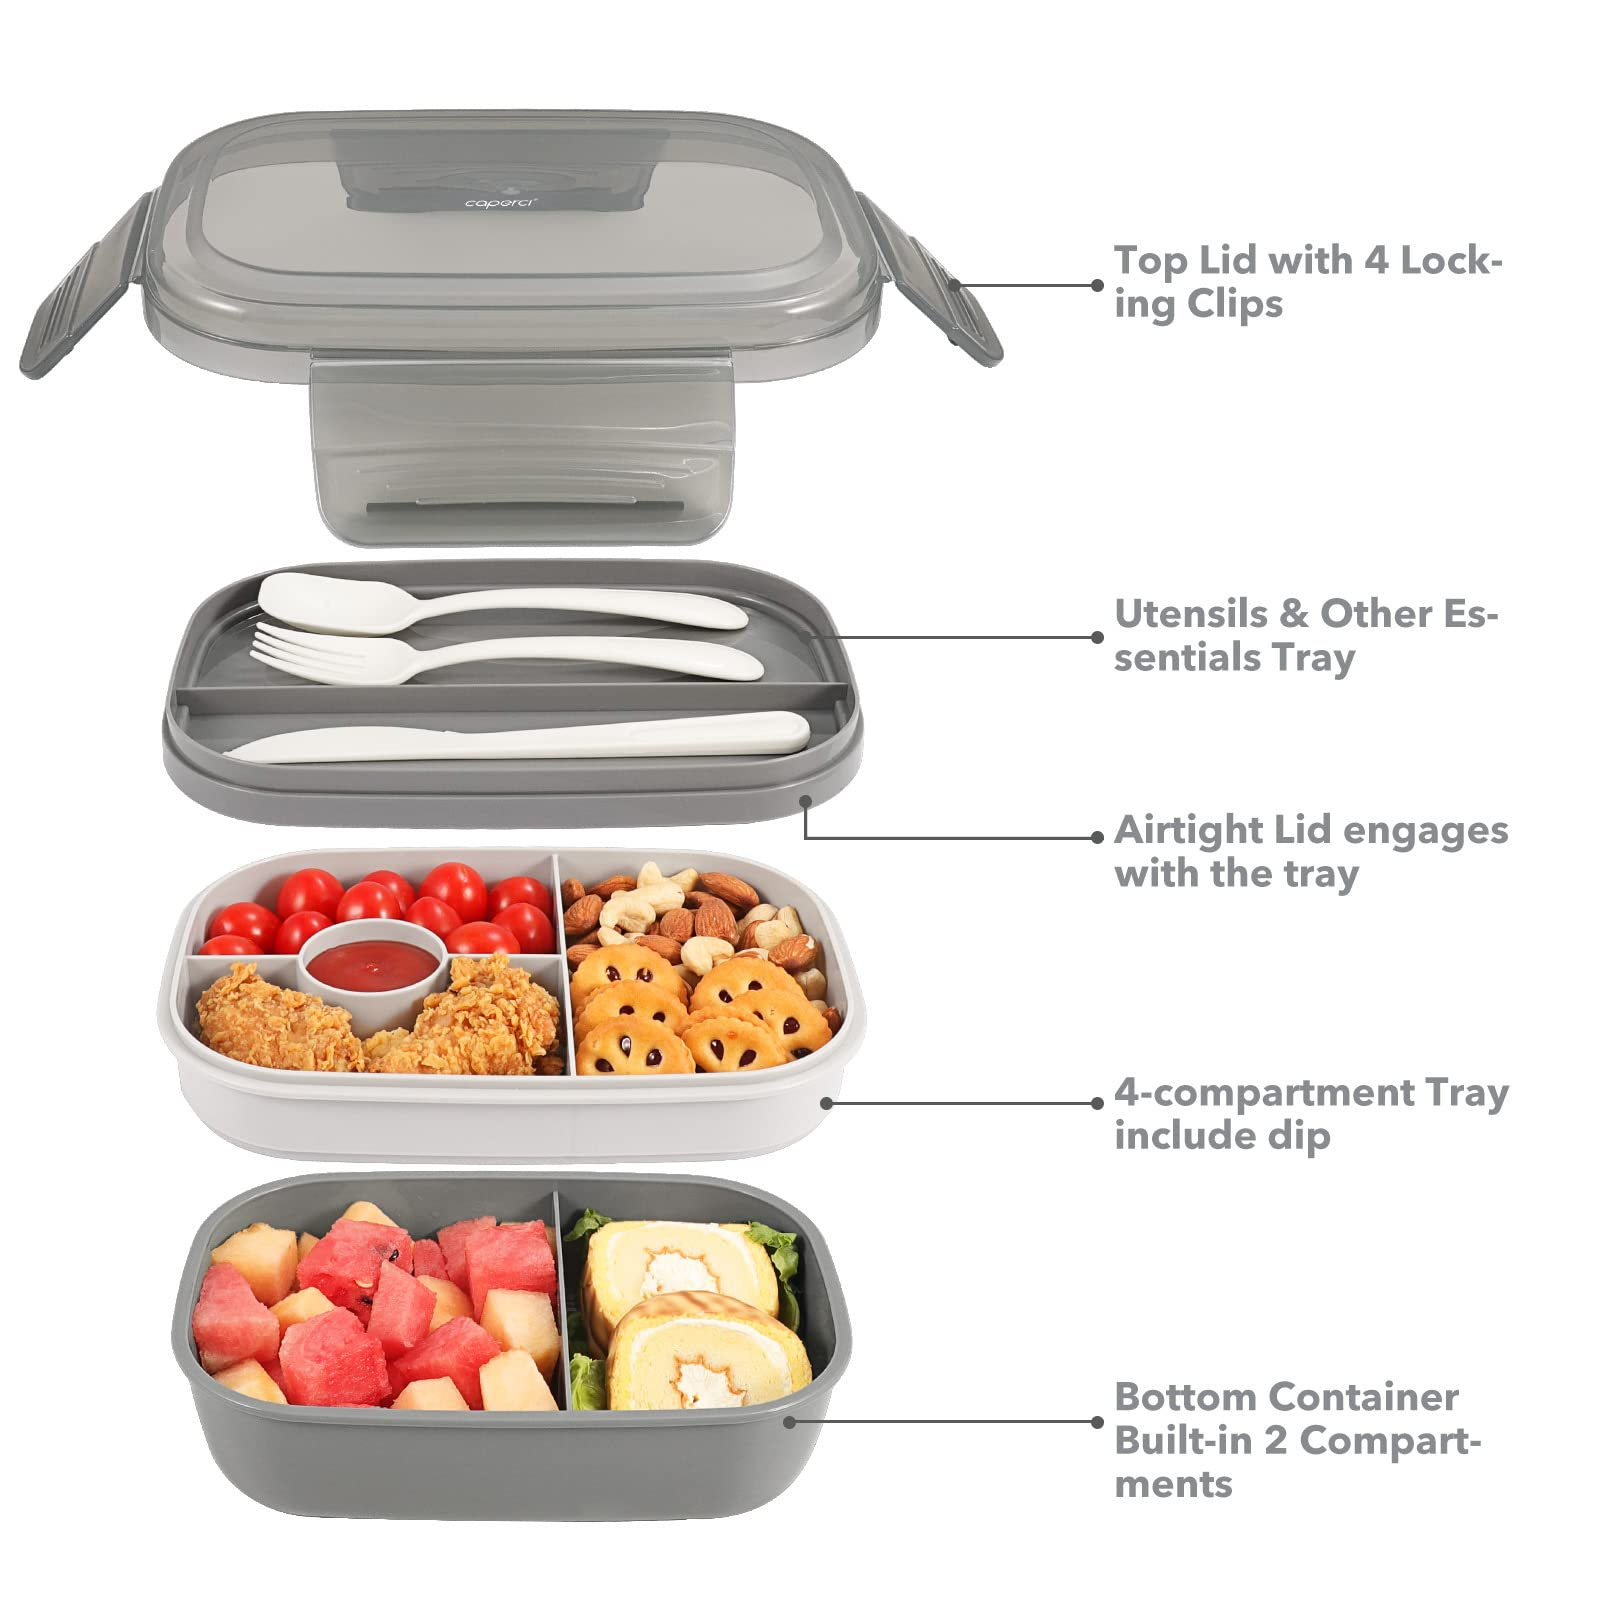 Caperci Stackable Bento Lunch Box for Kids - Large Size All-in-One Bento Box  Adu